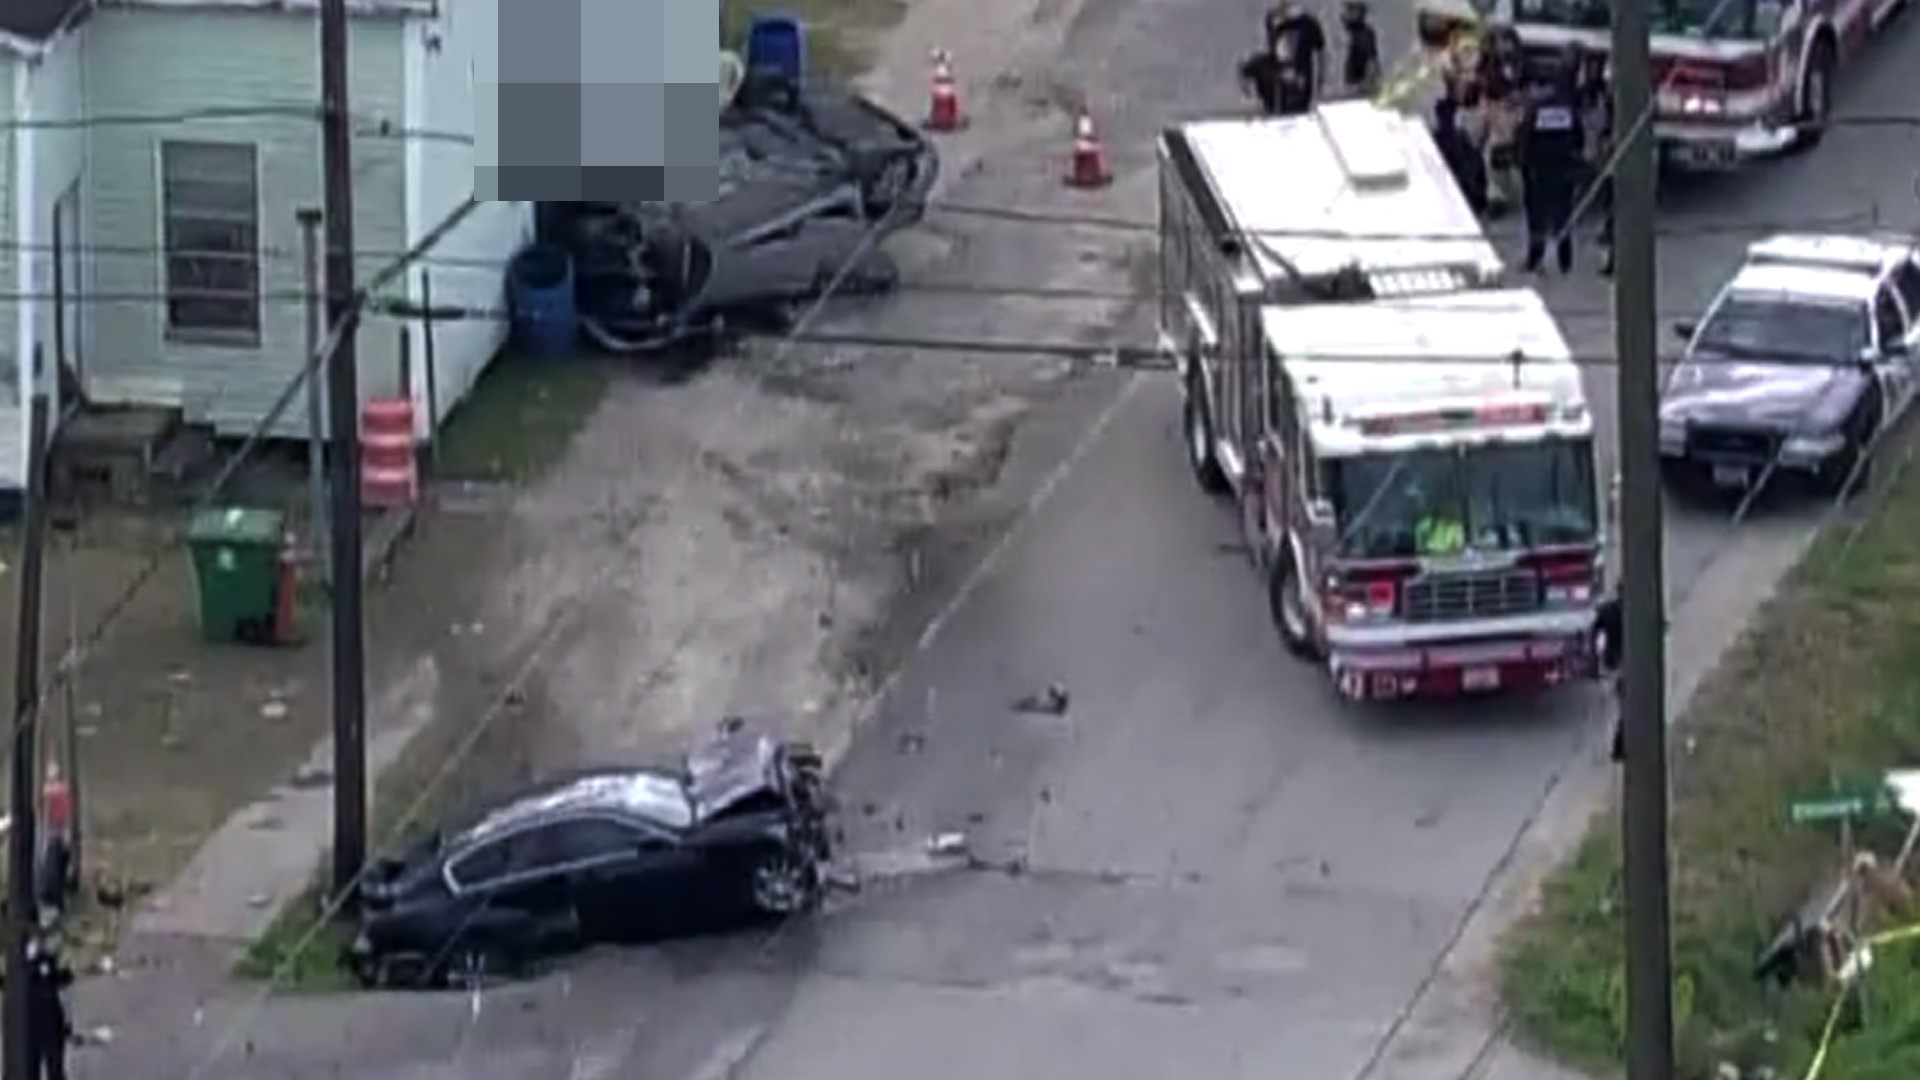 Raw video, no audio. At least 1 was killed after a crash in the 700 block of Fidelity in east Houston on Jan. 19, 2021